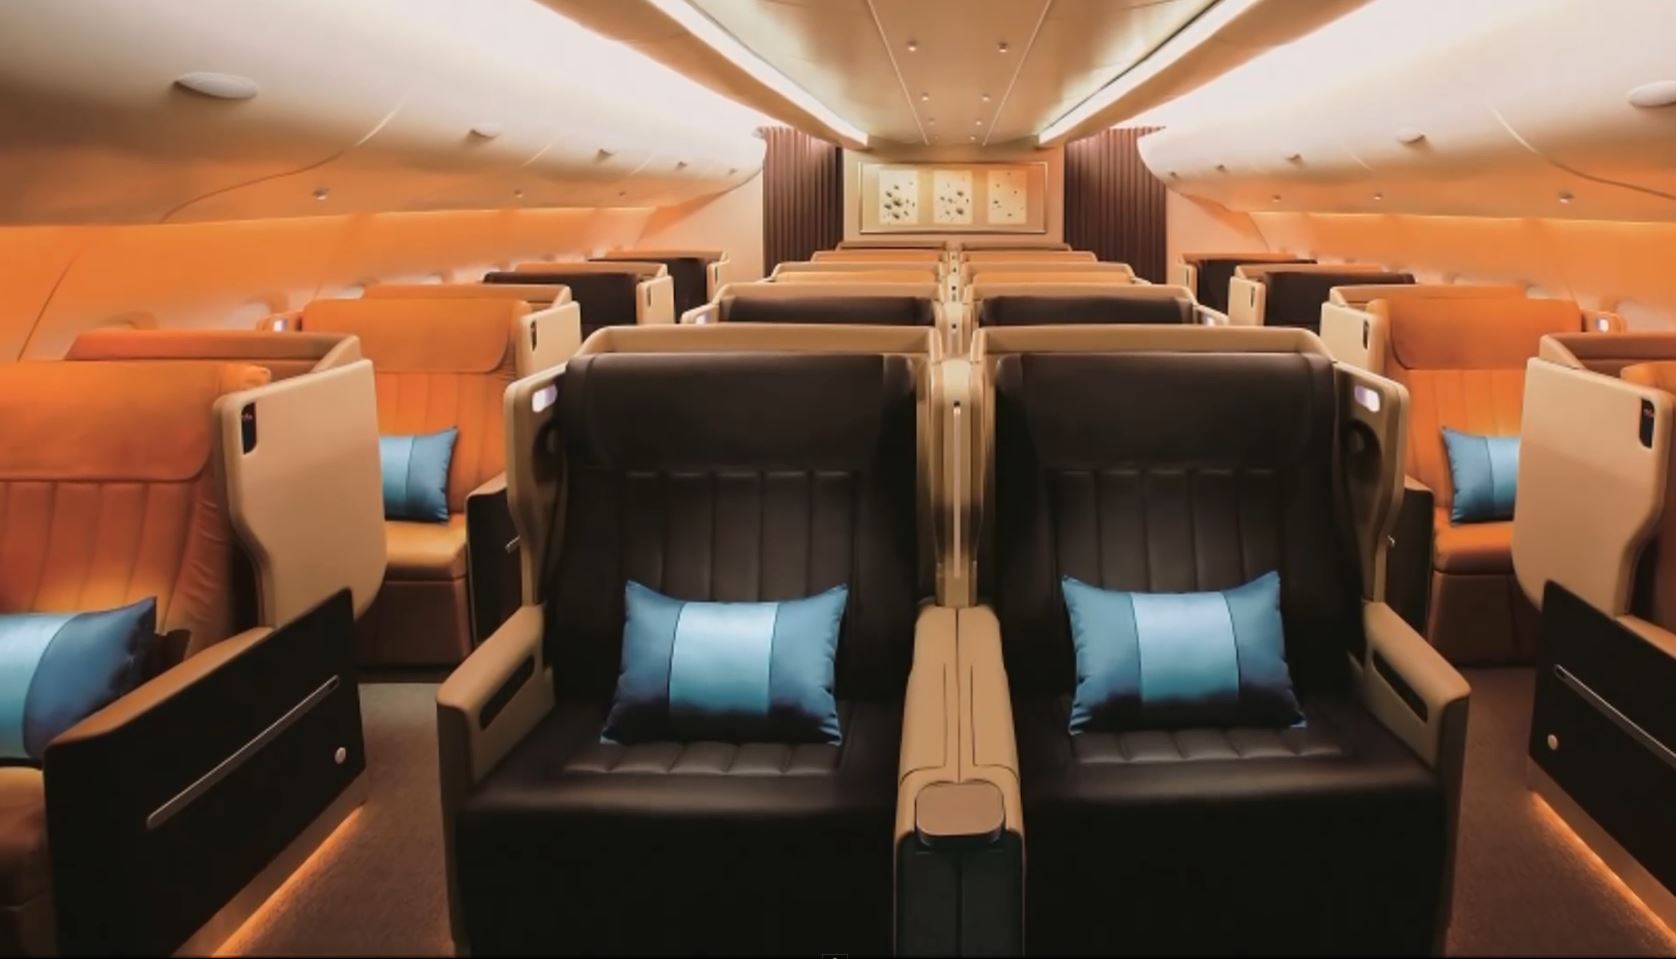 Top 10 Airlines for Long-haul Business Class (2015)